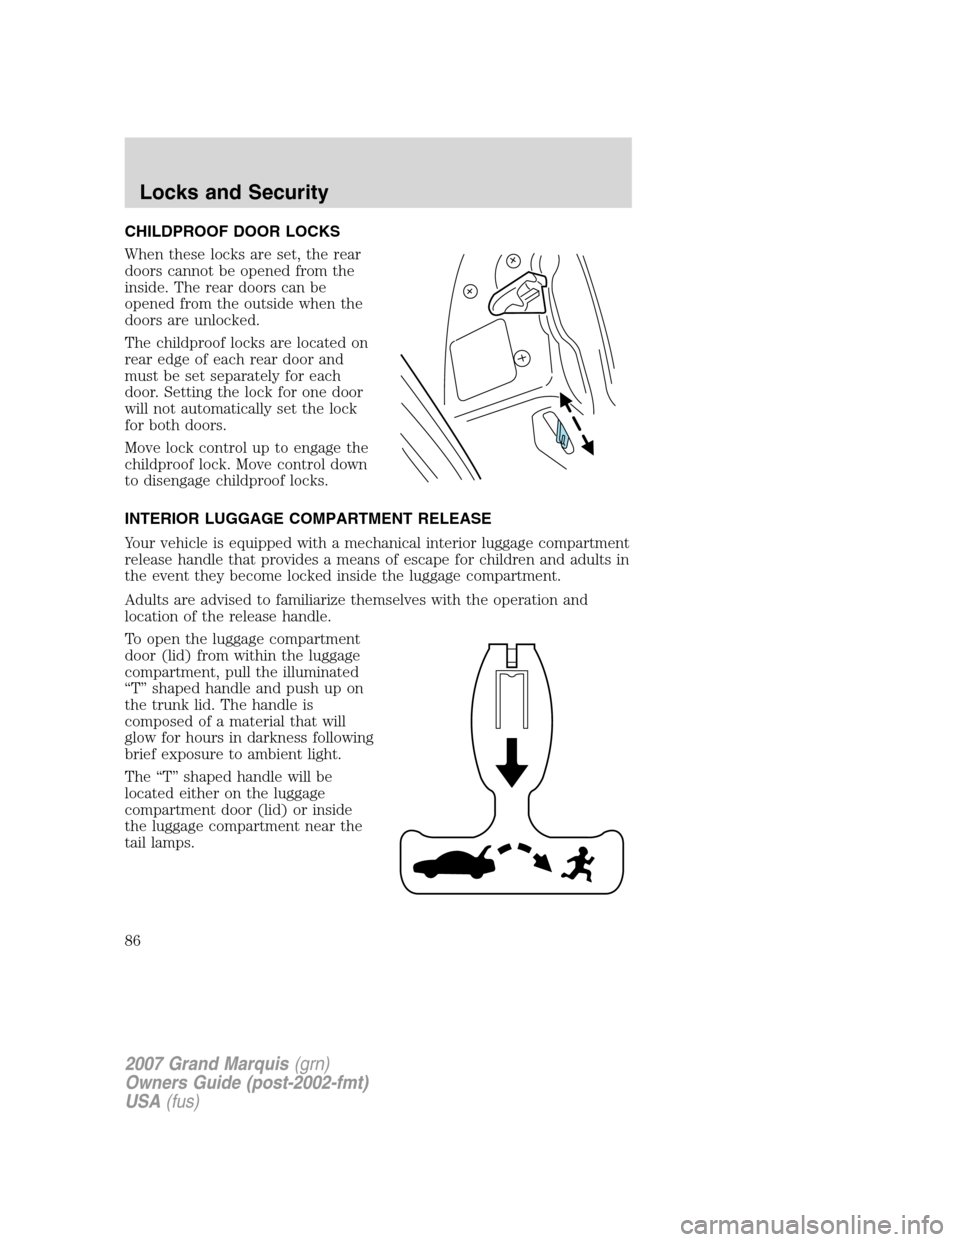 Mercury Grand Marquis 2007  Owners Manuals CHILDPROOF DOOR LOCKS
When these locks are set, the rear
doors cannot be opened from the
inside. The rear doors can be
opened from the outside when the
doors are unlocked.
The childproof locks are loc